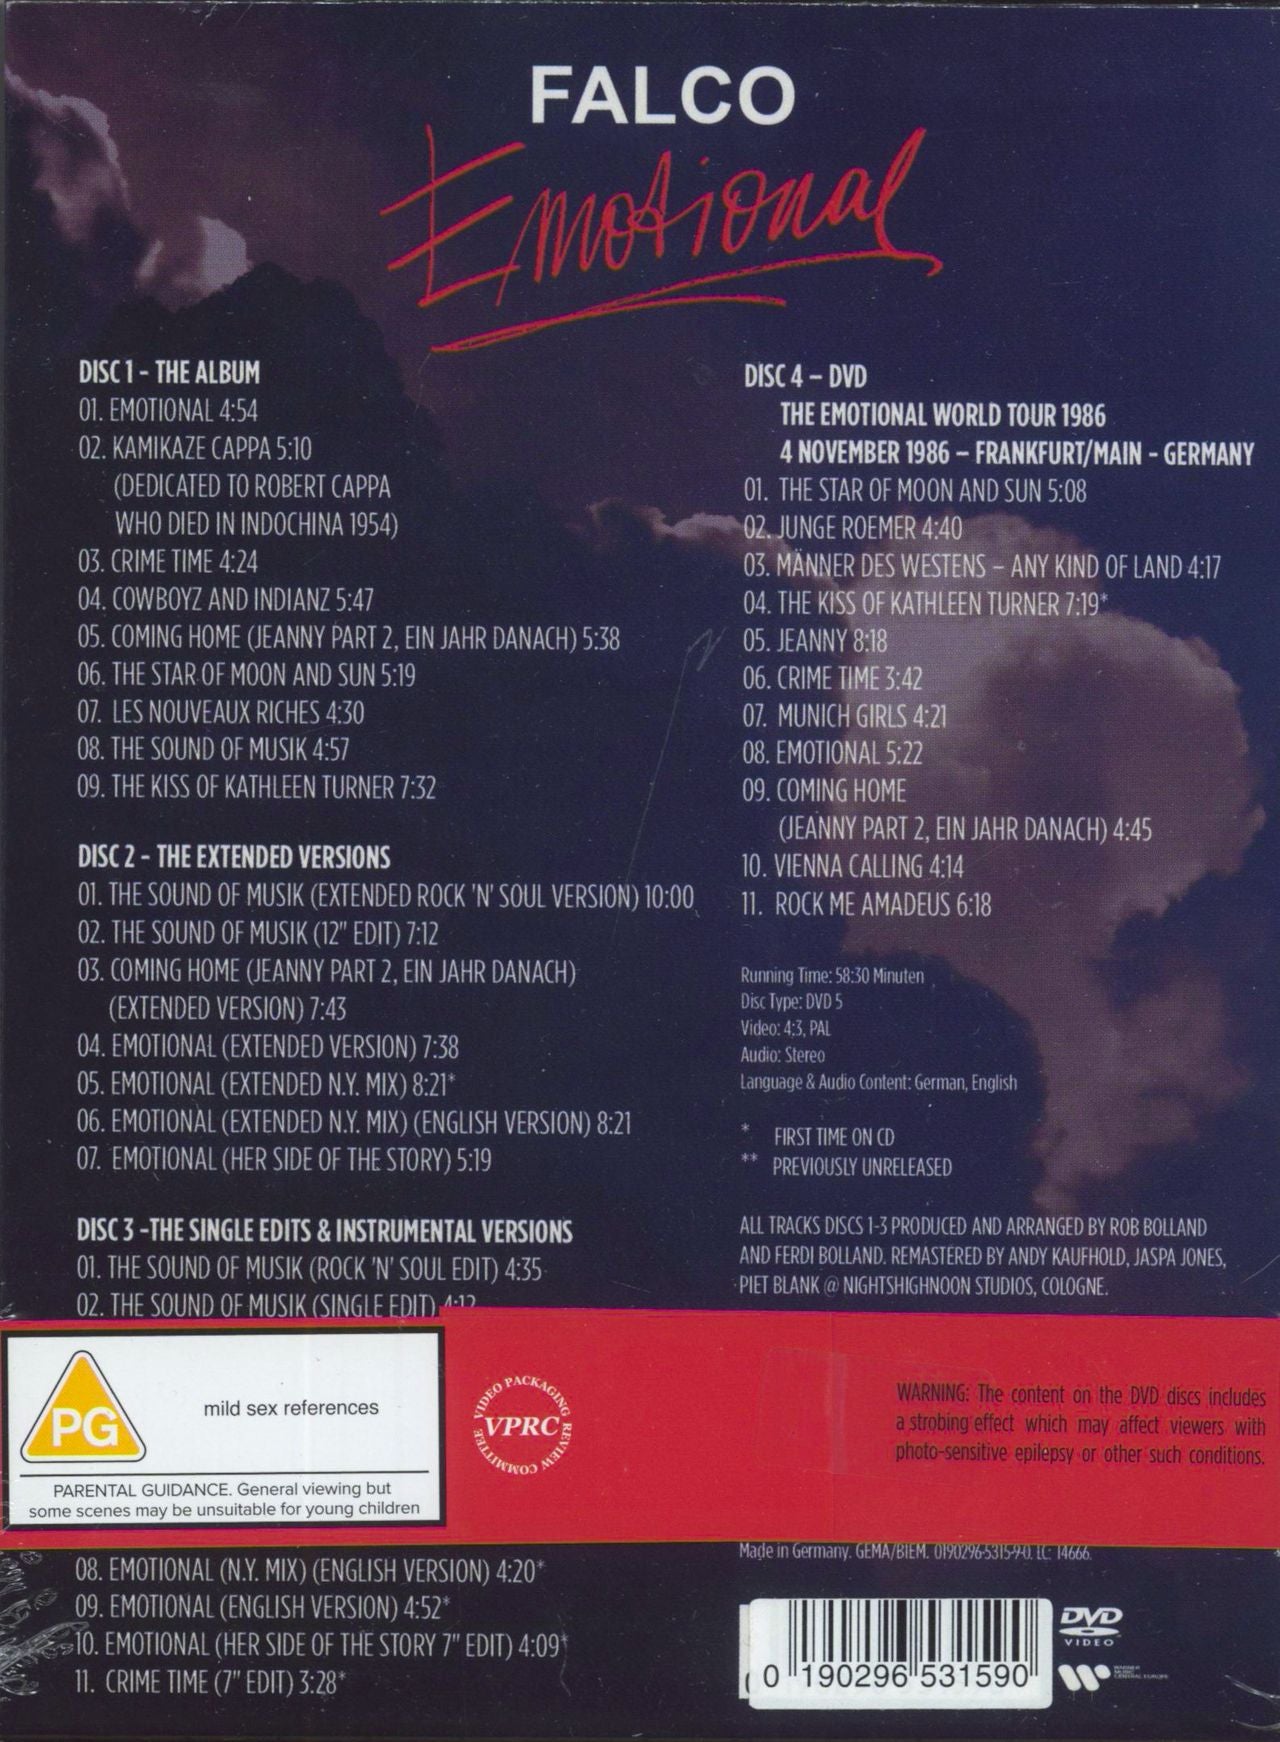 Set　UK　Deluxe　3-disc　Edition　CD/DVD　Sealed　—　Falco　Emotional: